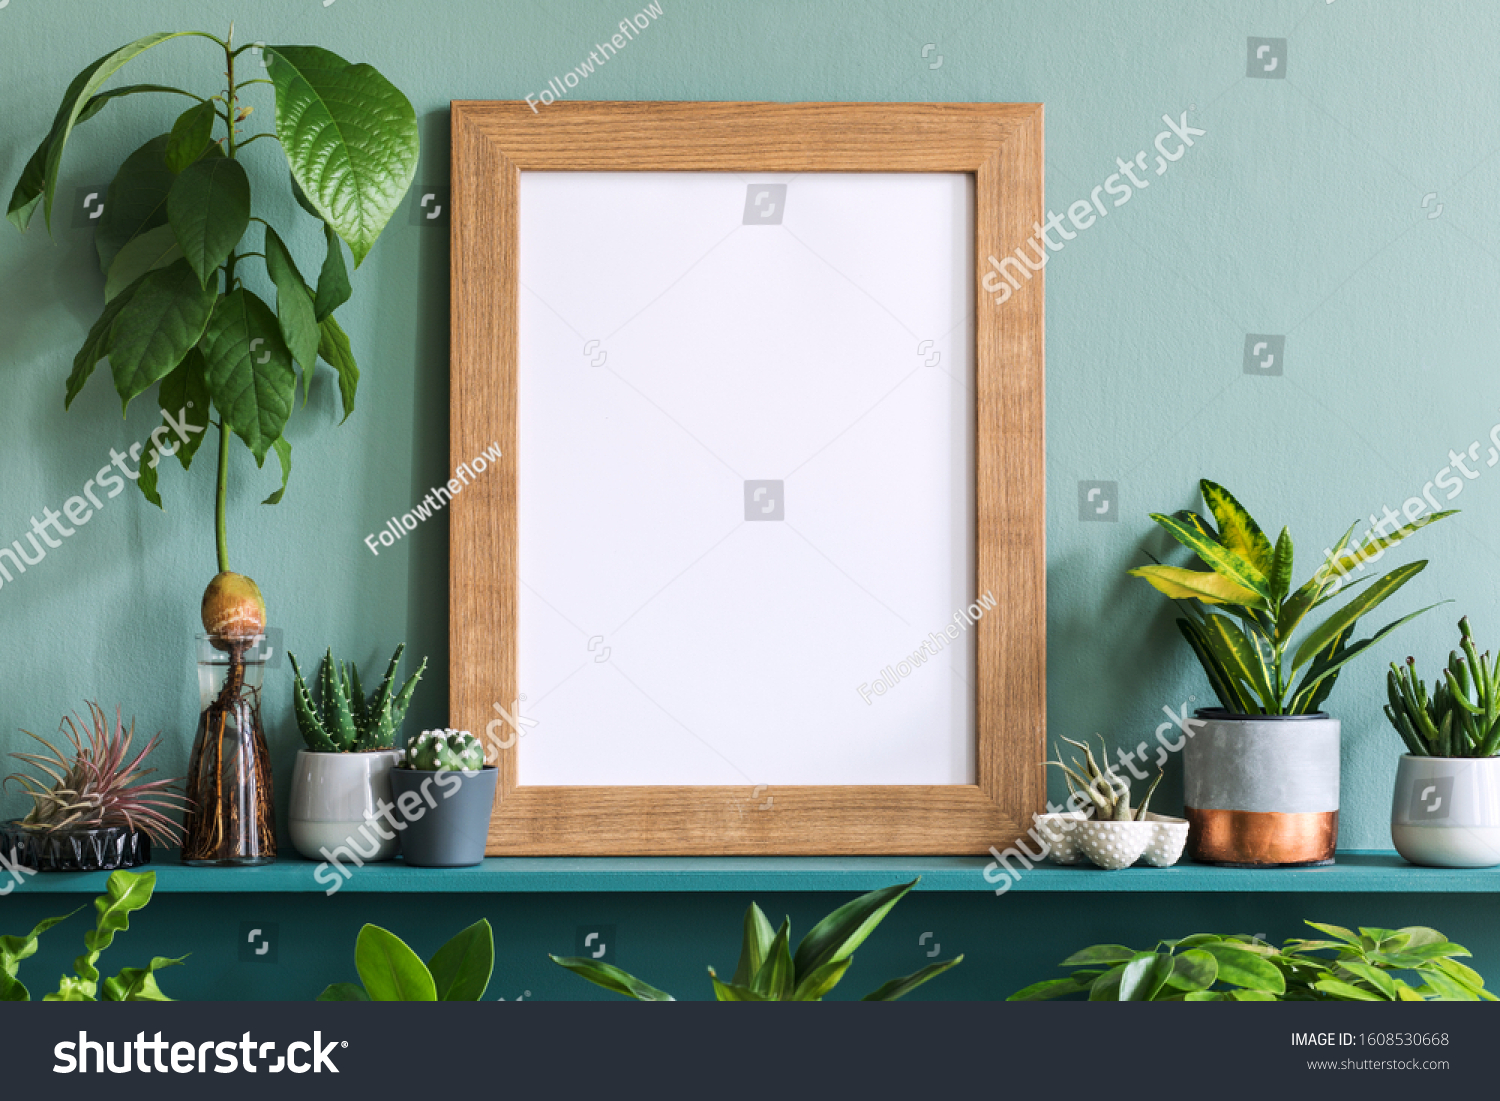 Interior design of living room with brown mock up photo frame on the green shelf with beautiful plants in different hipster and design pots. Elegant personal accessories. Home gardening. Template. 